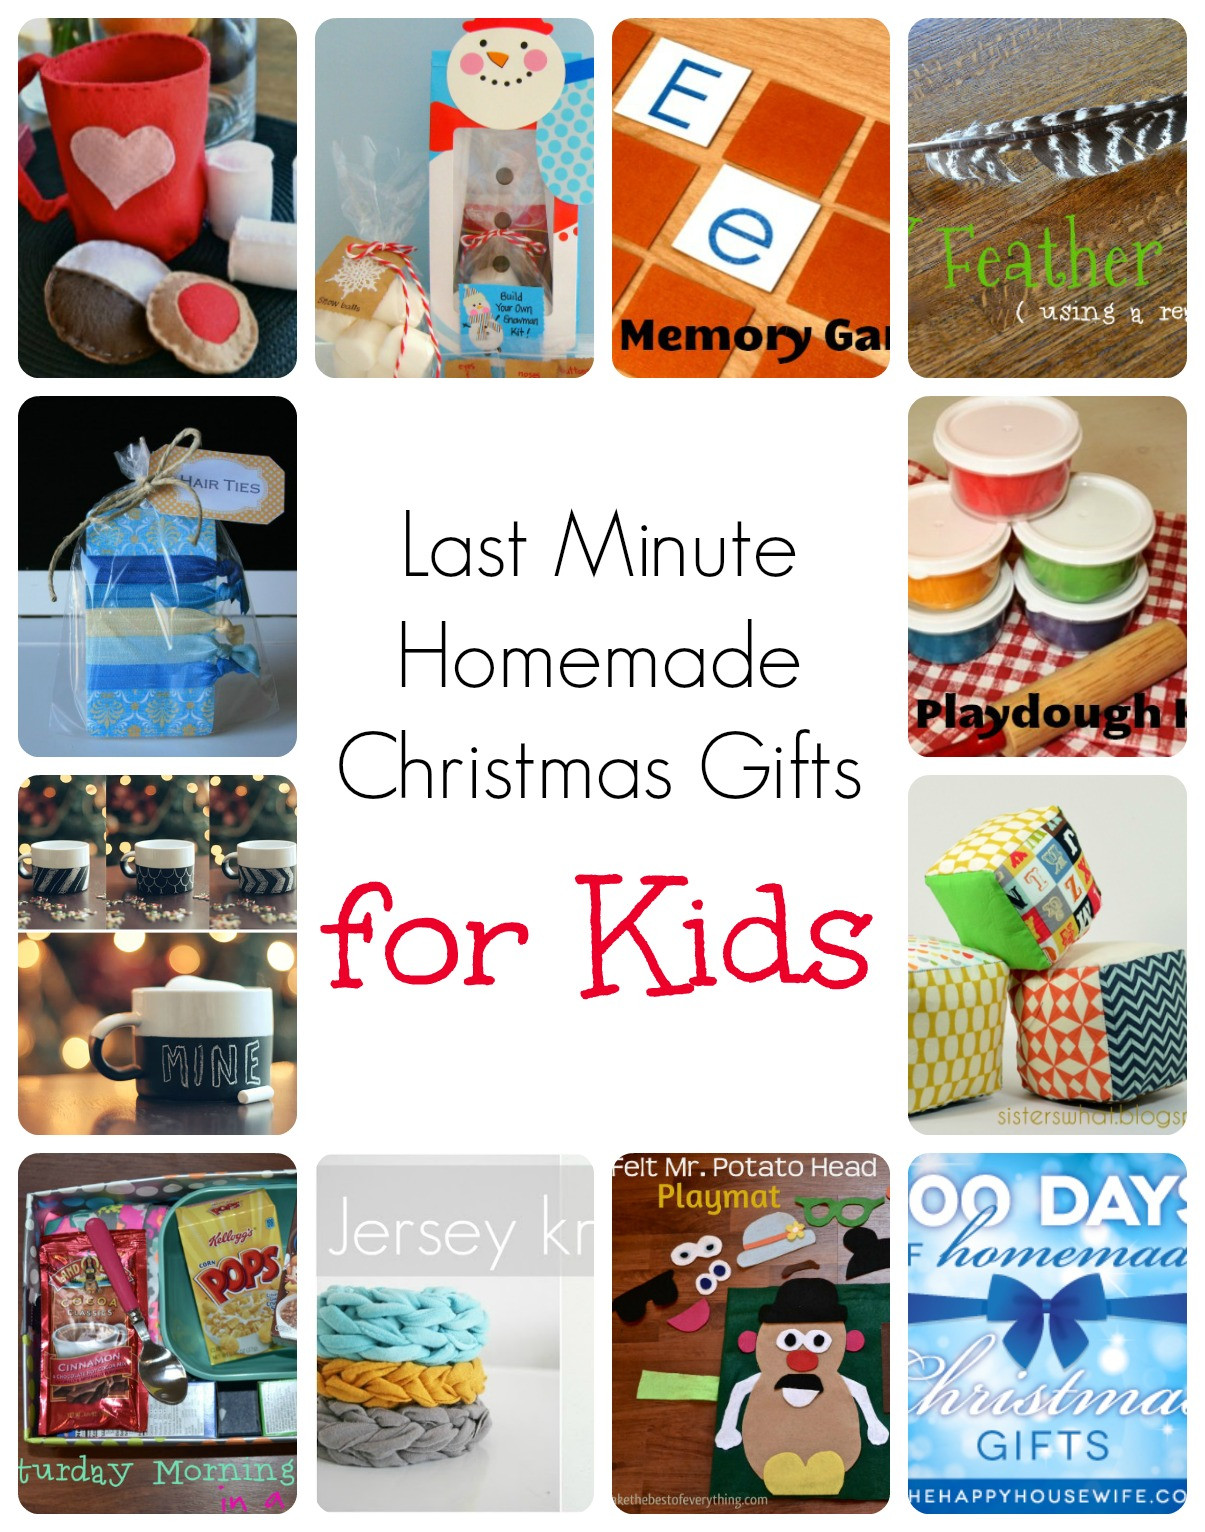 Last Minute Christmas Gifts For Kids
 Last Minute Homemade Christmas Gifts for Kids The Happy